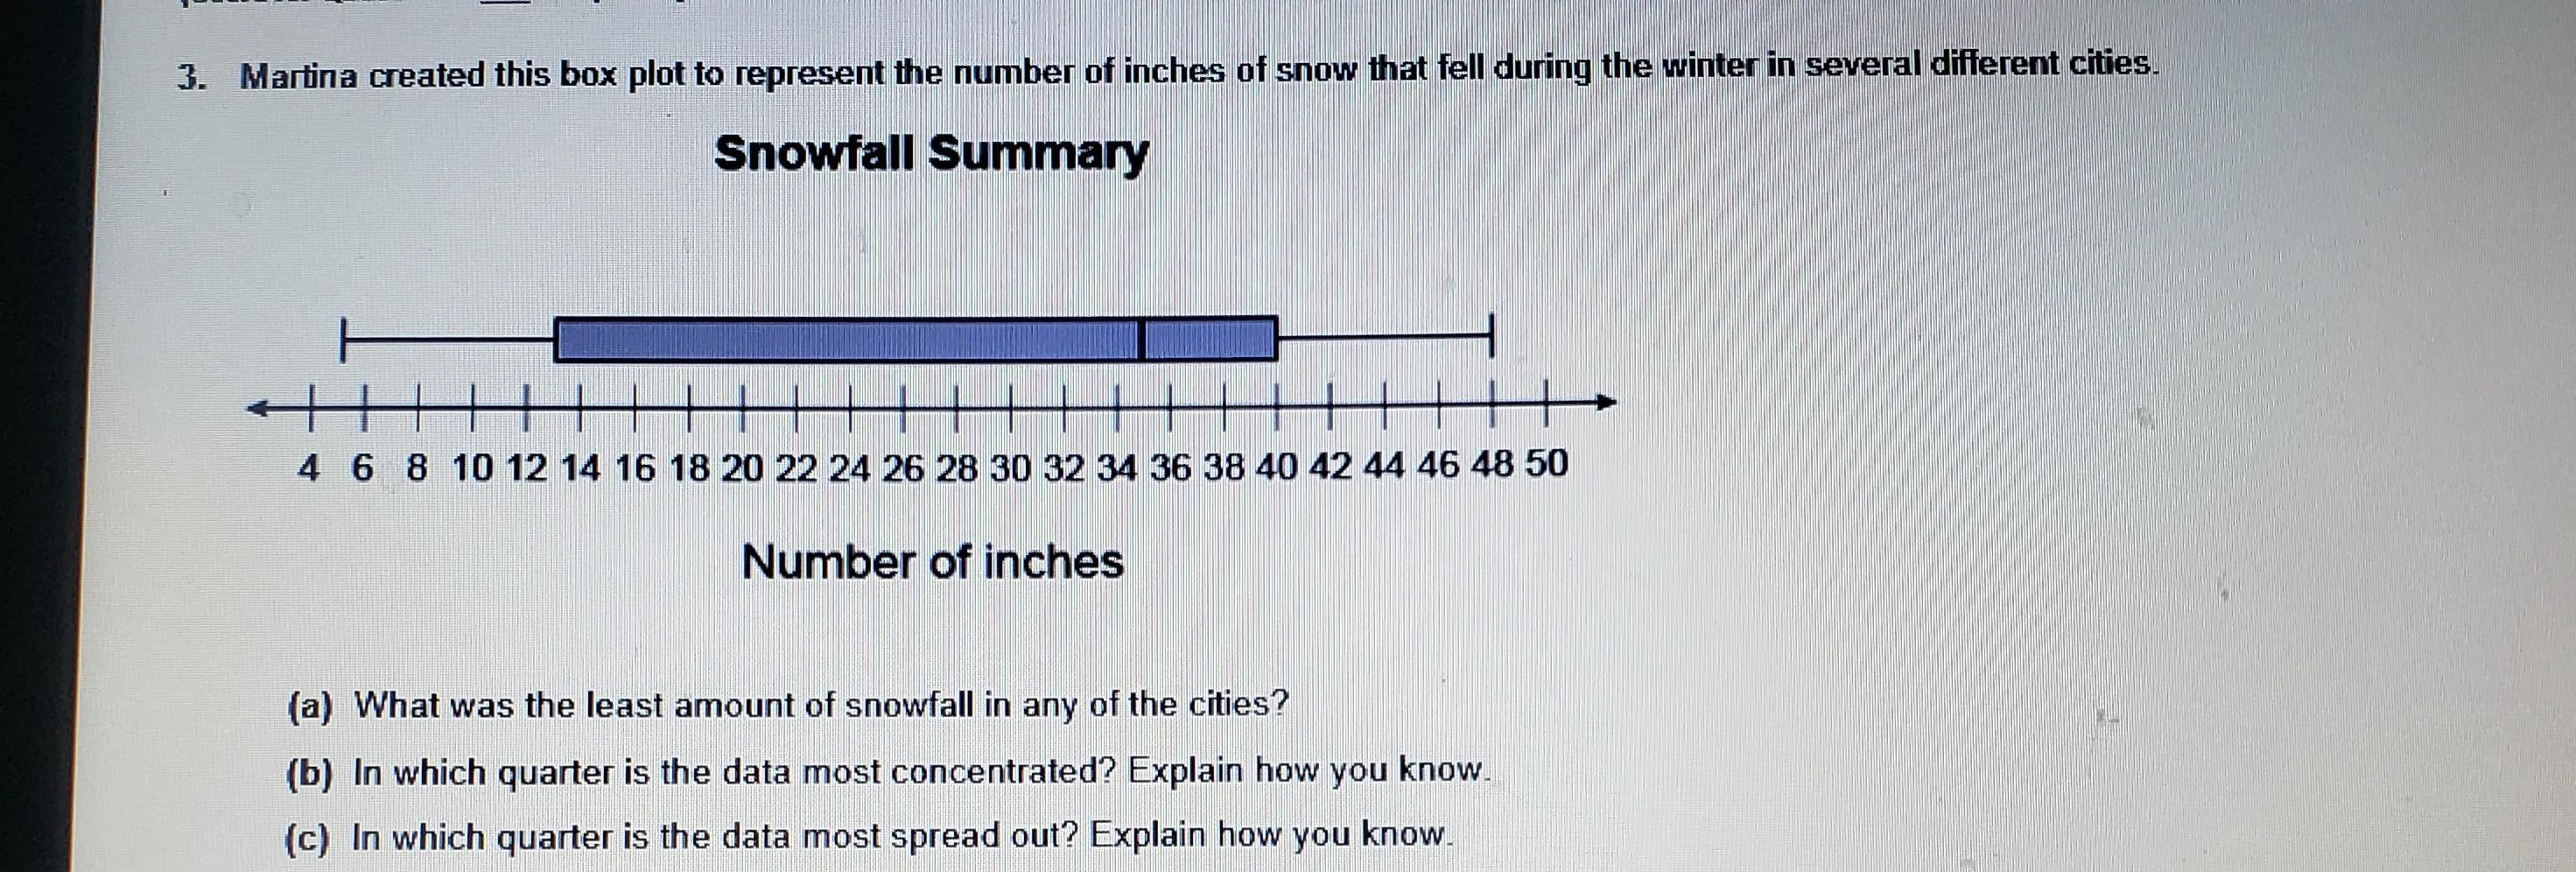  Martina Created This Box Plot To Represent The Number Of Inches Of Snow That Fell During The Winter